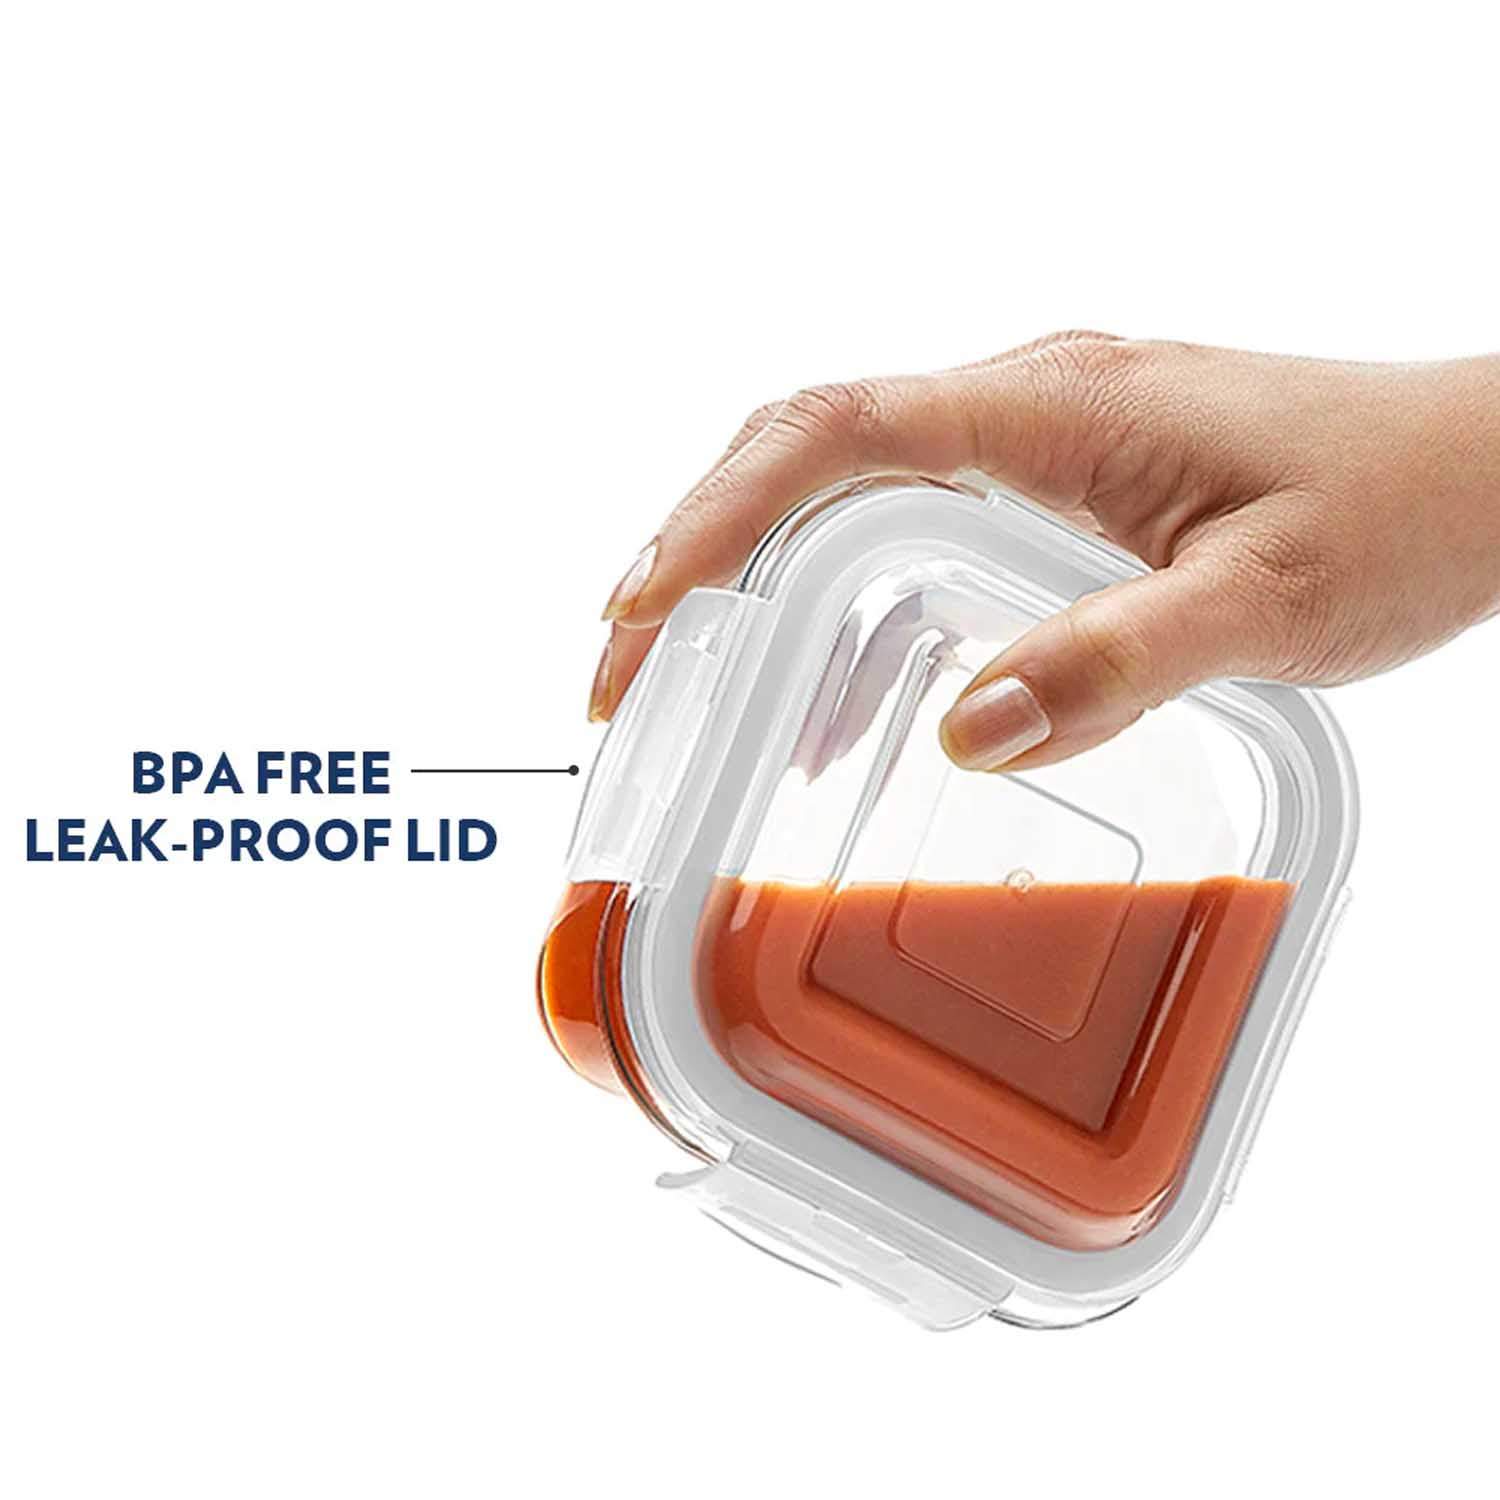 Borosil Klip-N-Store Square Glass Storage Container With Air Tight Lid 320 Ml